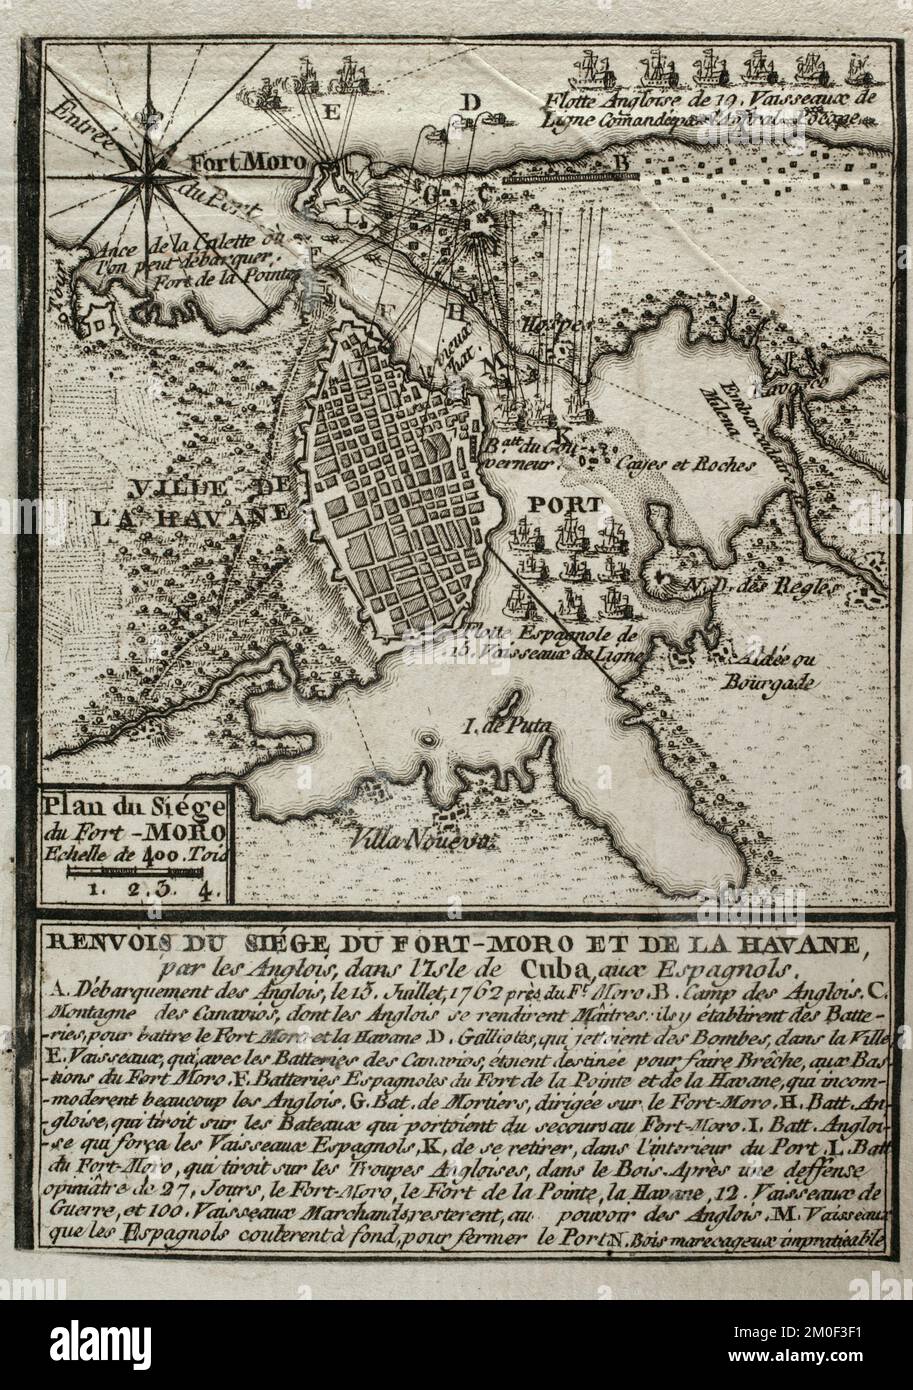 Seven Years War (1756-1763). Map of the siege of Fort Morro, 1762. Island of Cuba. Capture of Havana. English troops attacked the Spanish defences when they came into conflict with the Spanish Crown, following Spain's alliance with France, England's enemy. British troops landed on the island on 13 July 1762, conquering it in August. Published in 1765 by the cartographer Jean de Beaurain (1696-1771) as an illustration of his Great Map of Germany, with the events that took place during the War of the Seven Years. Engraving. French edition, 1765. Military Historical Library of Barcelona (Bibliote Stock Photo